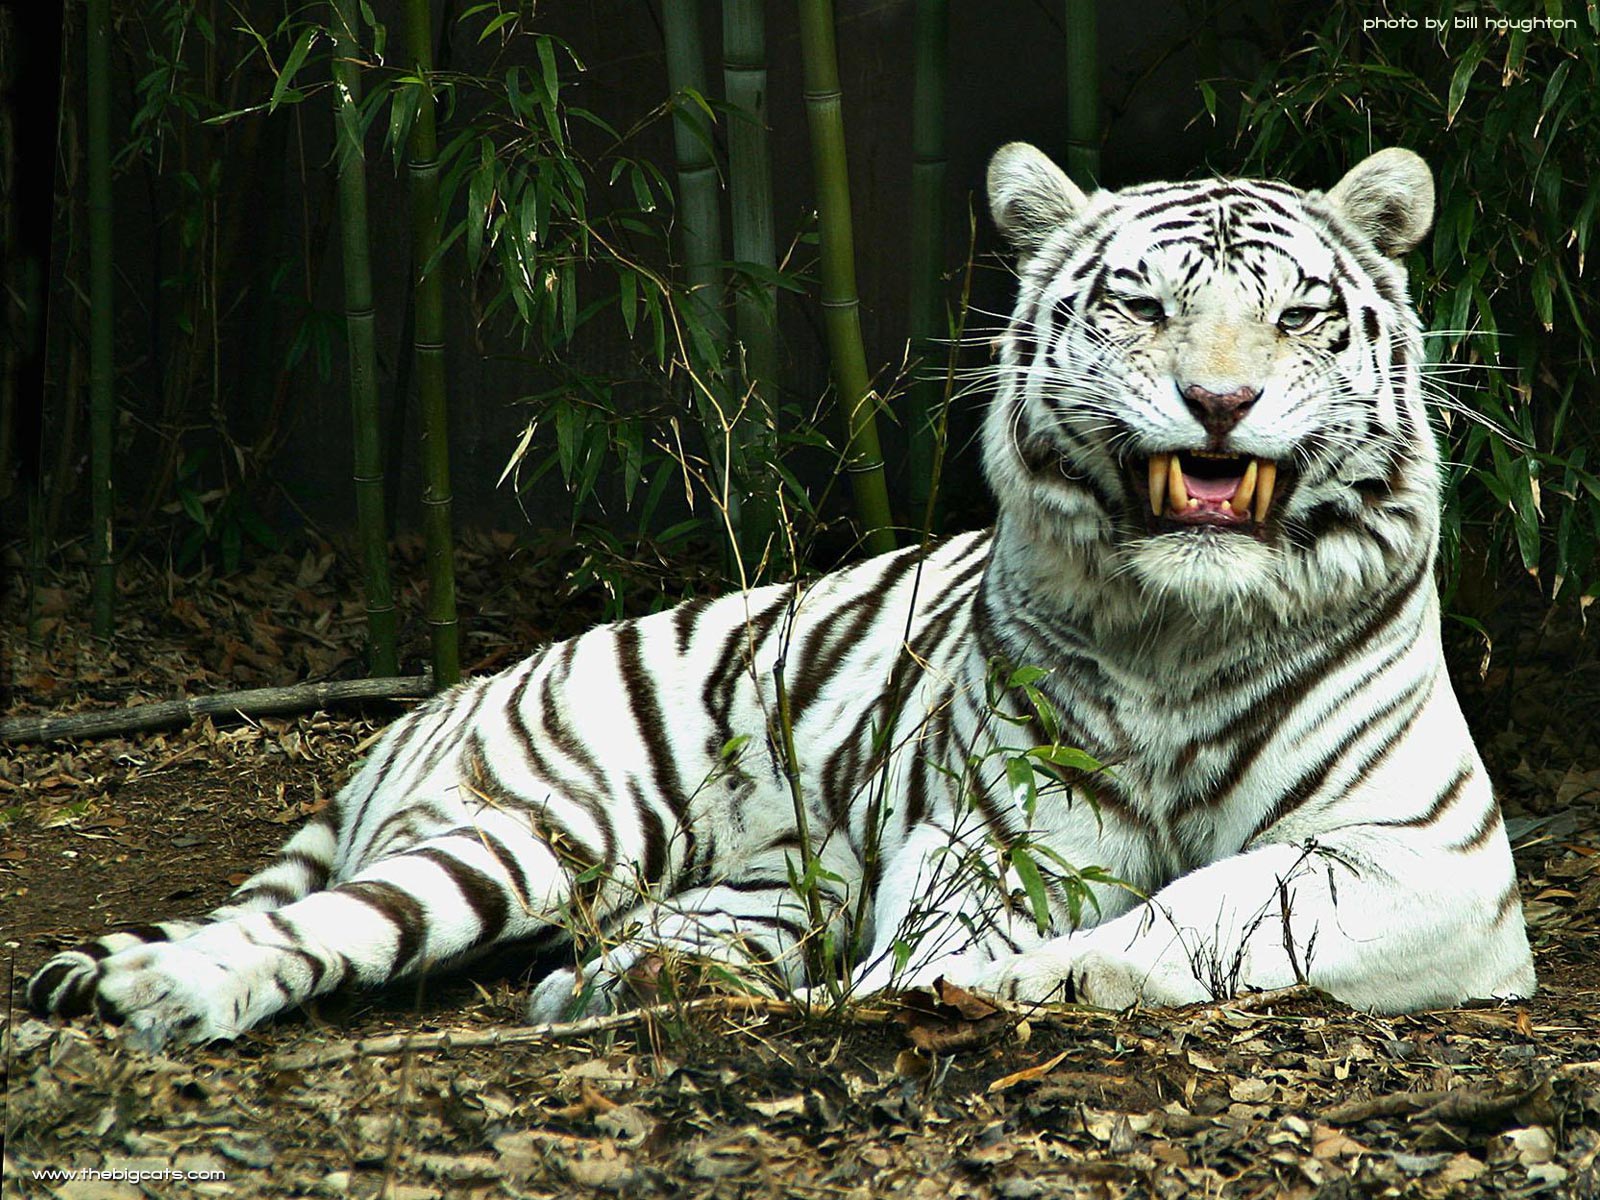 White tiger standing in a regal pose, showcasing its majestic beauty.